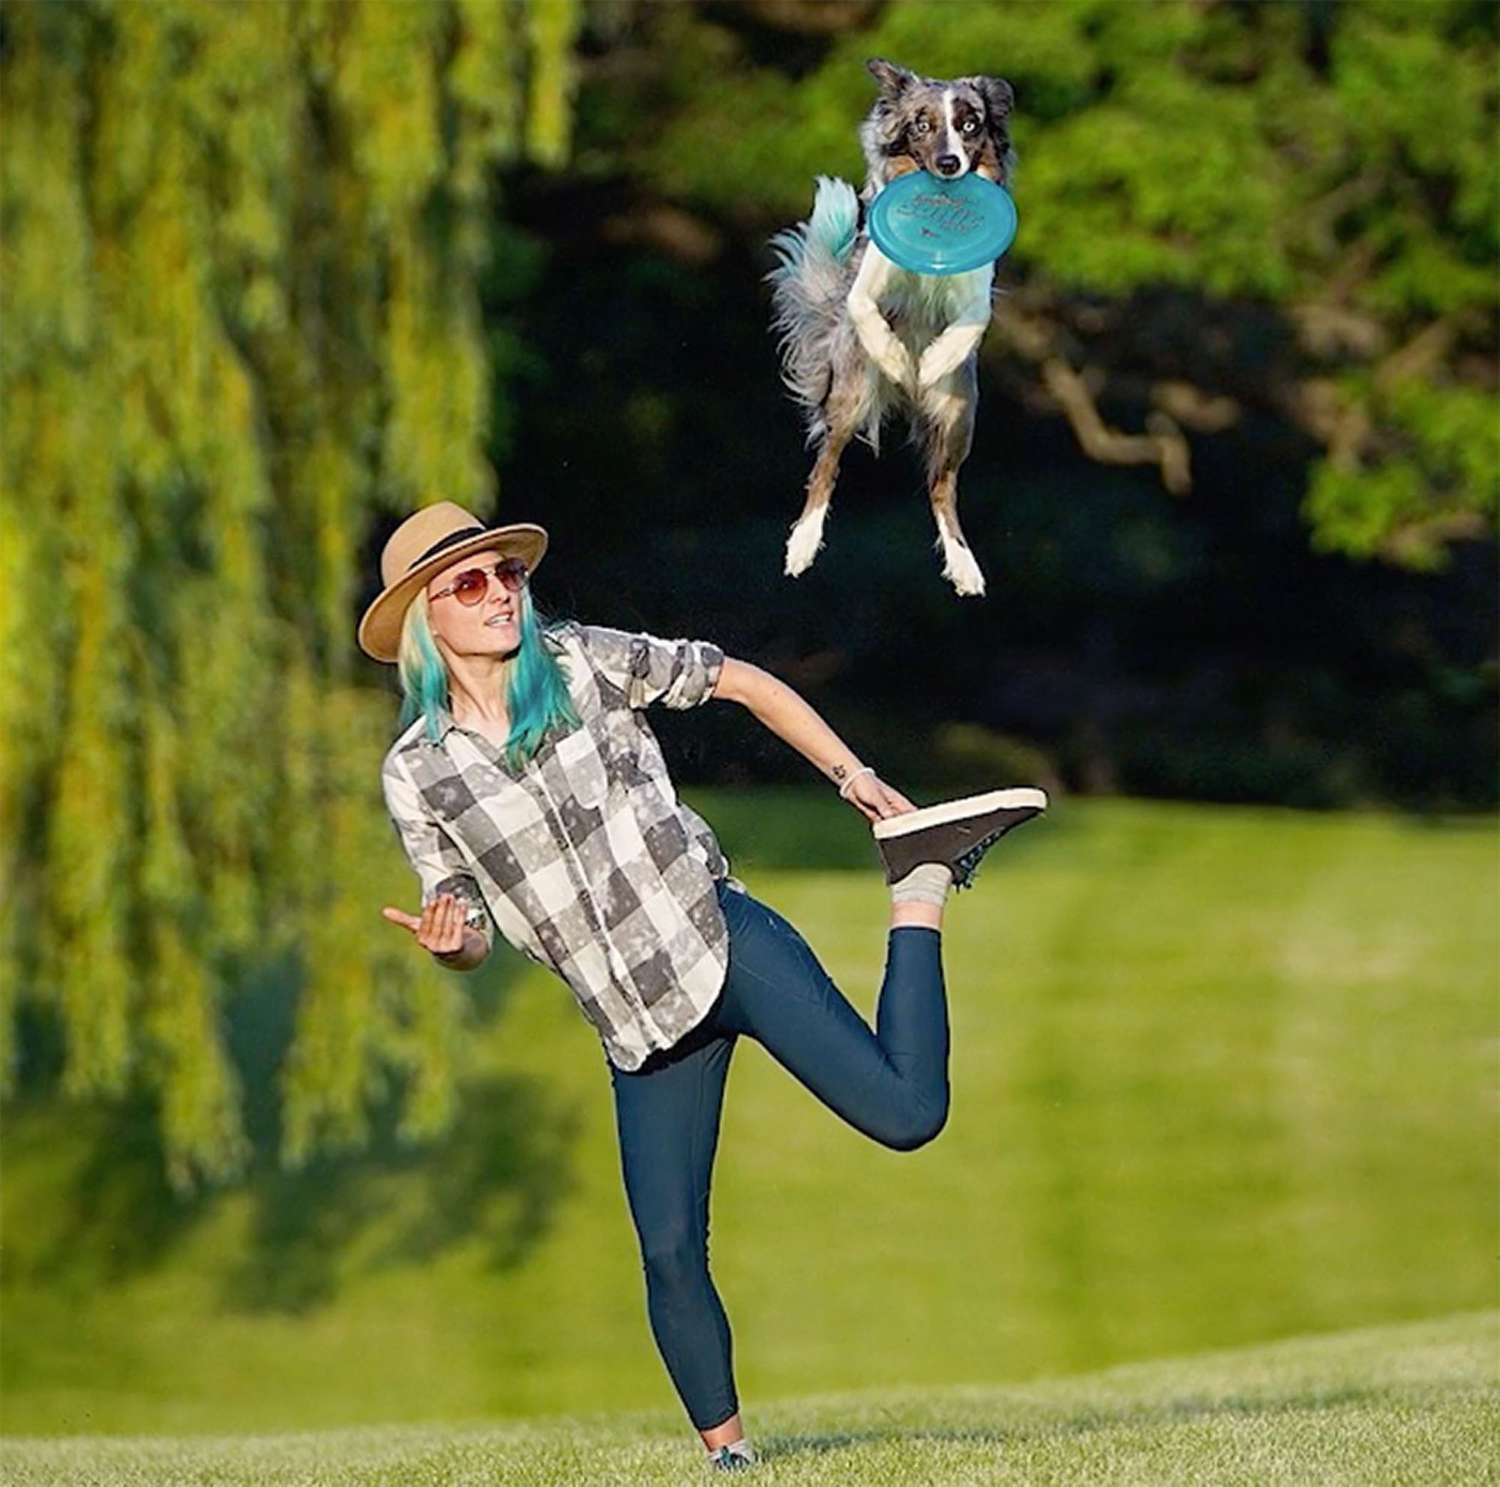 border collie jumping over Sara with a frisbee in his mouth